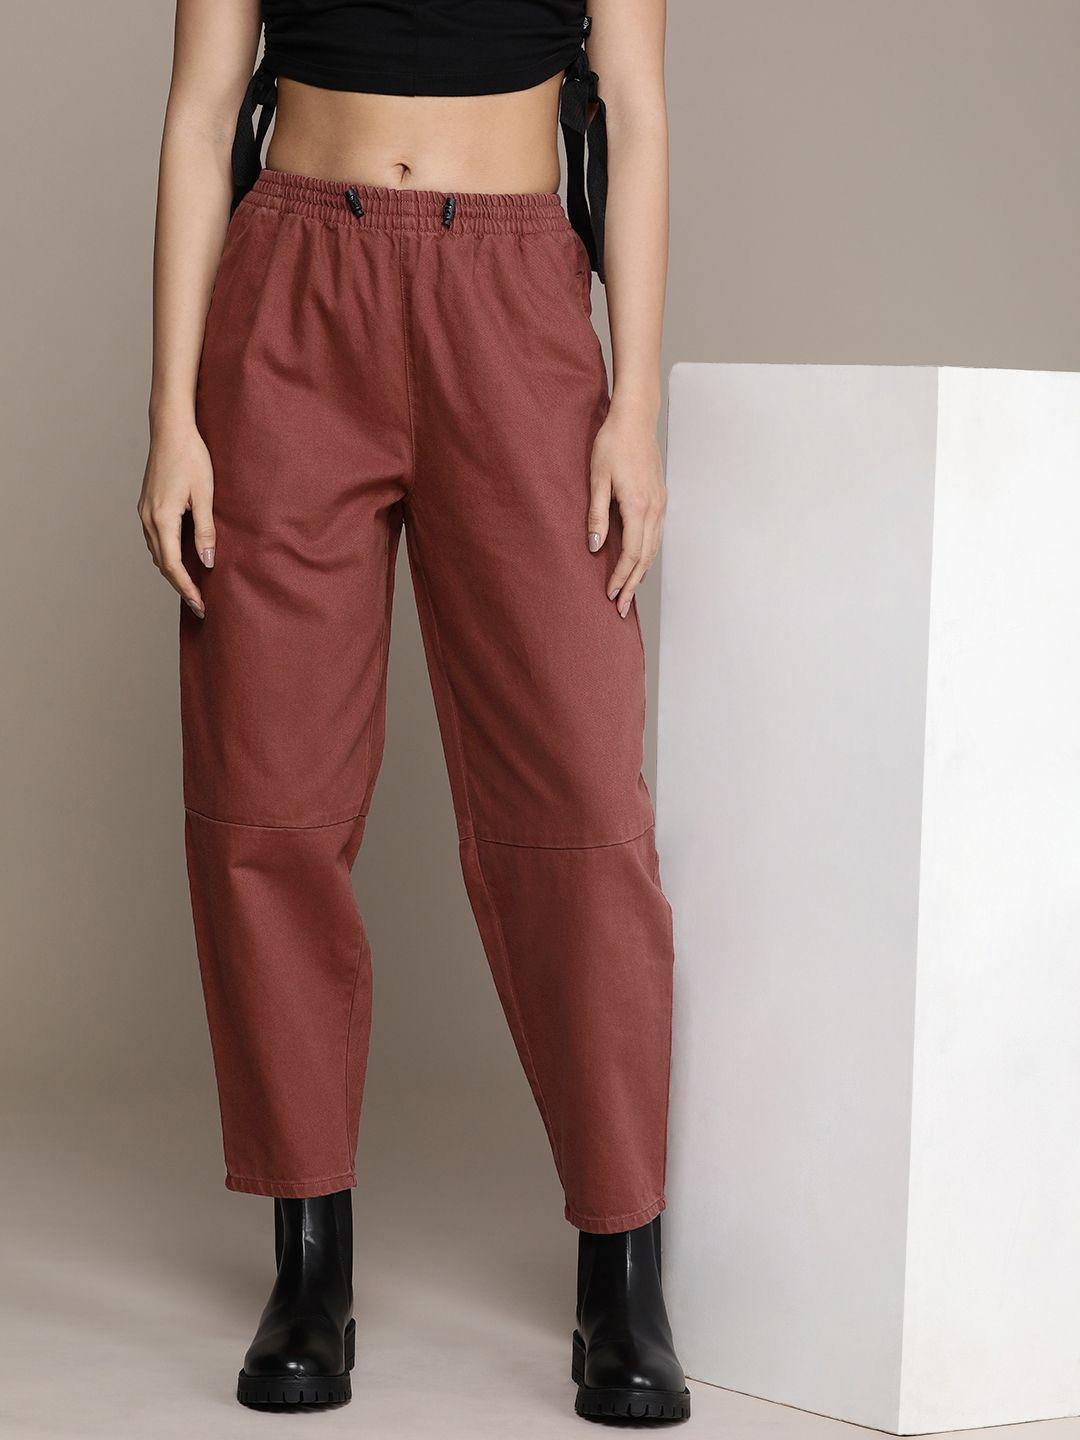 the-roadster-life-co.-women-solid-mid-rise-pure-cotton-regular-trousers